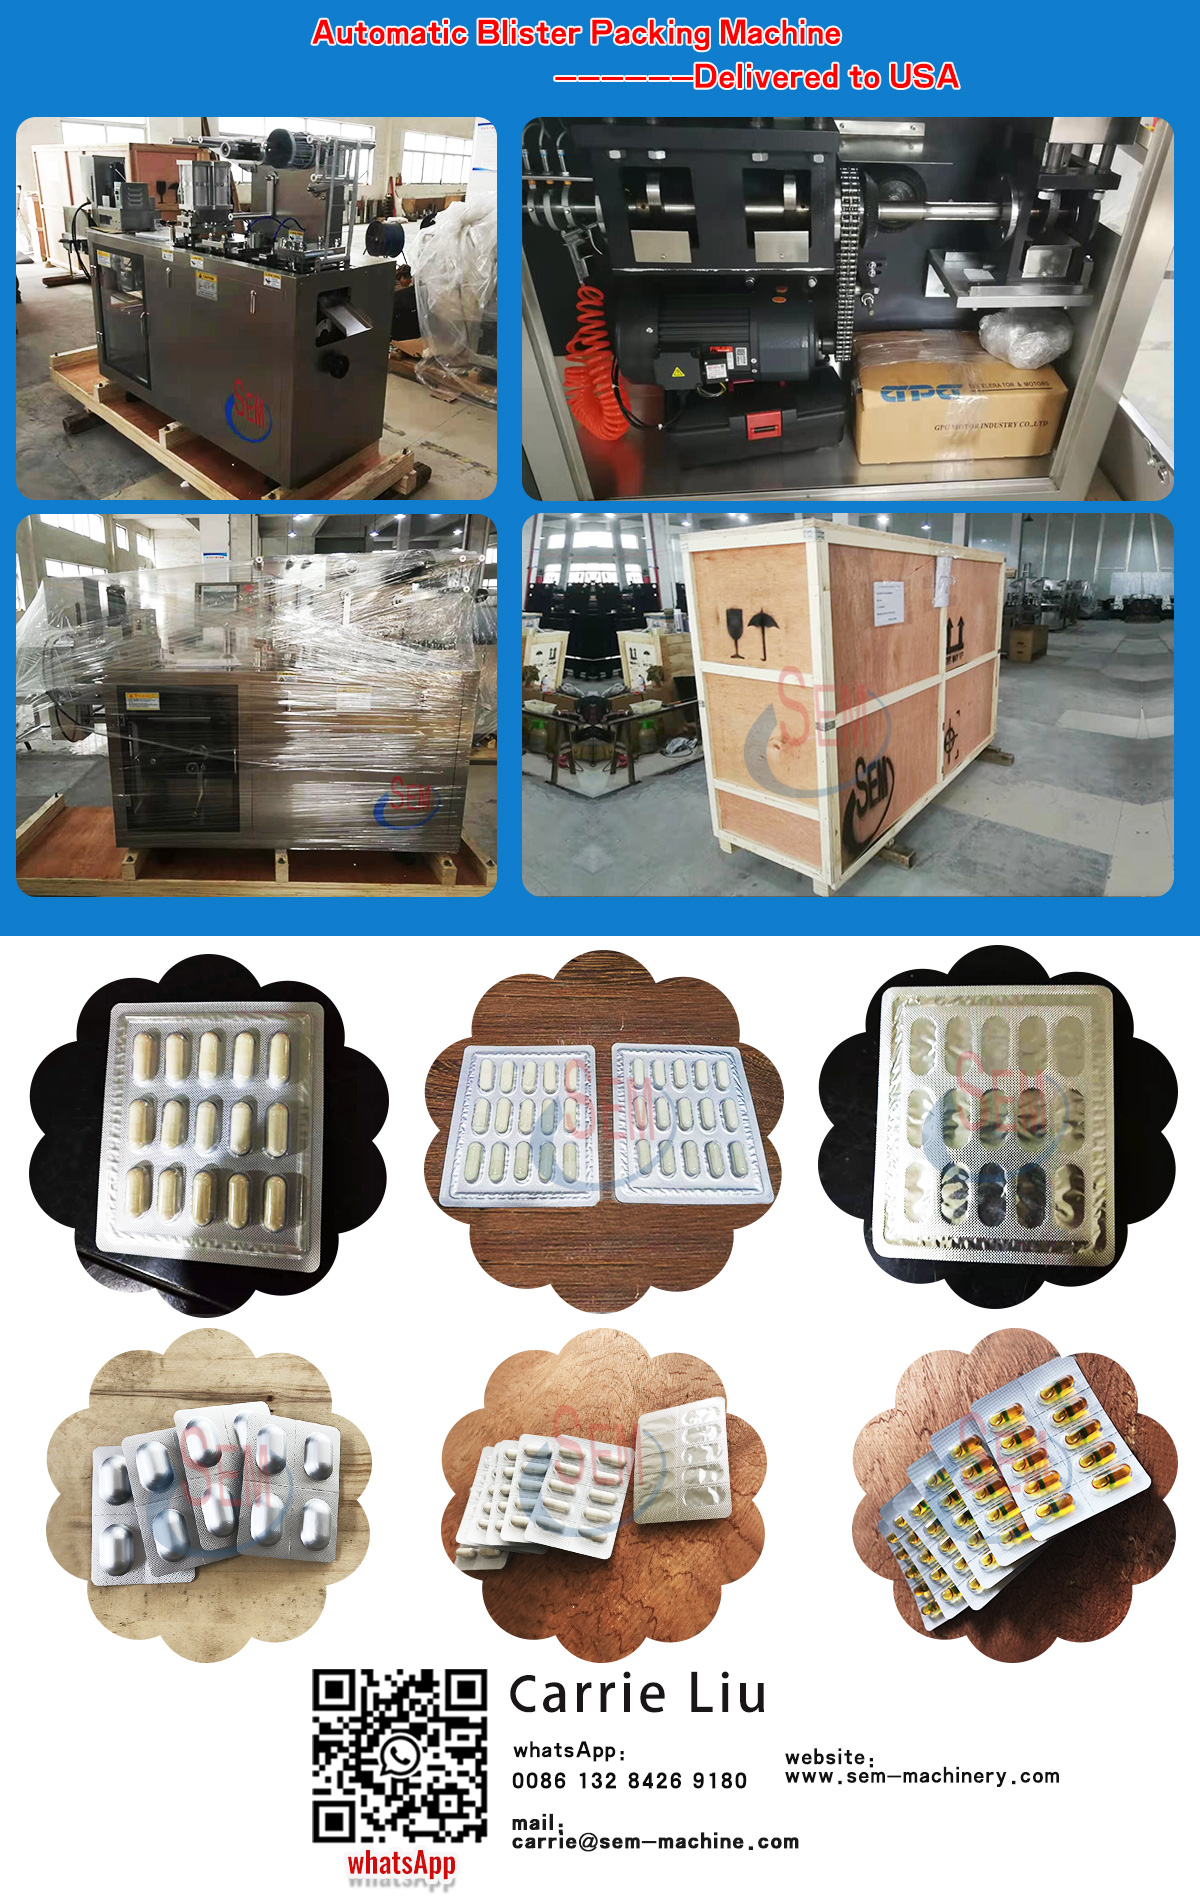 Automatic blister packing machine —deliver to USA